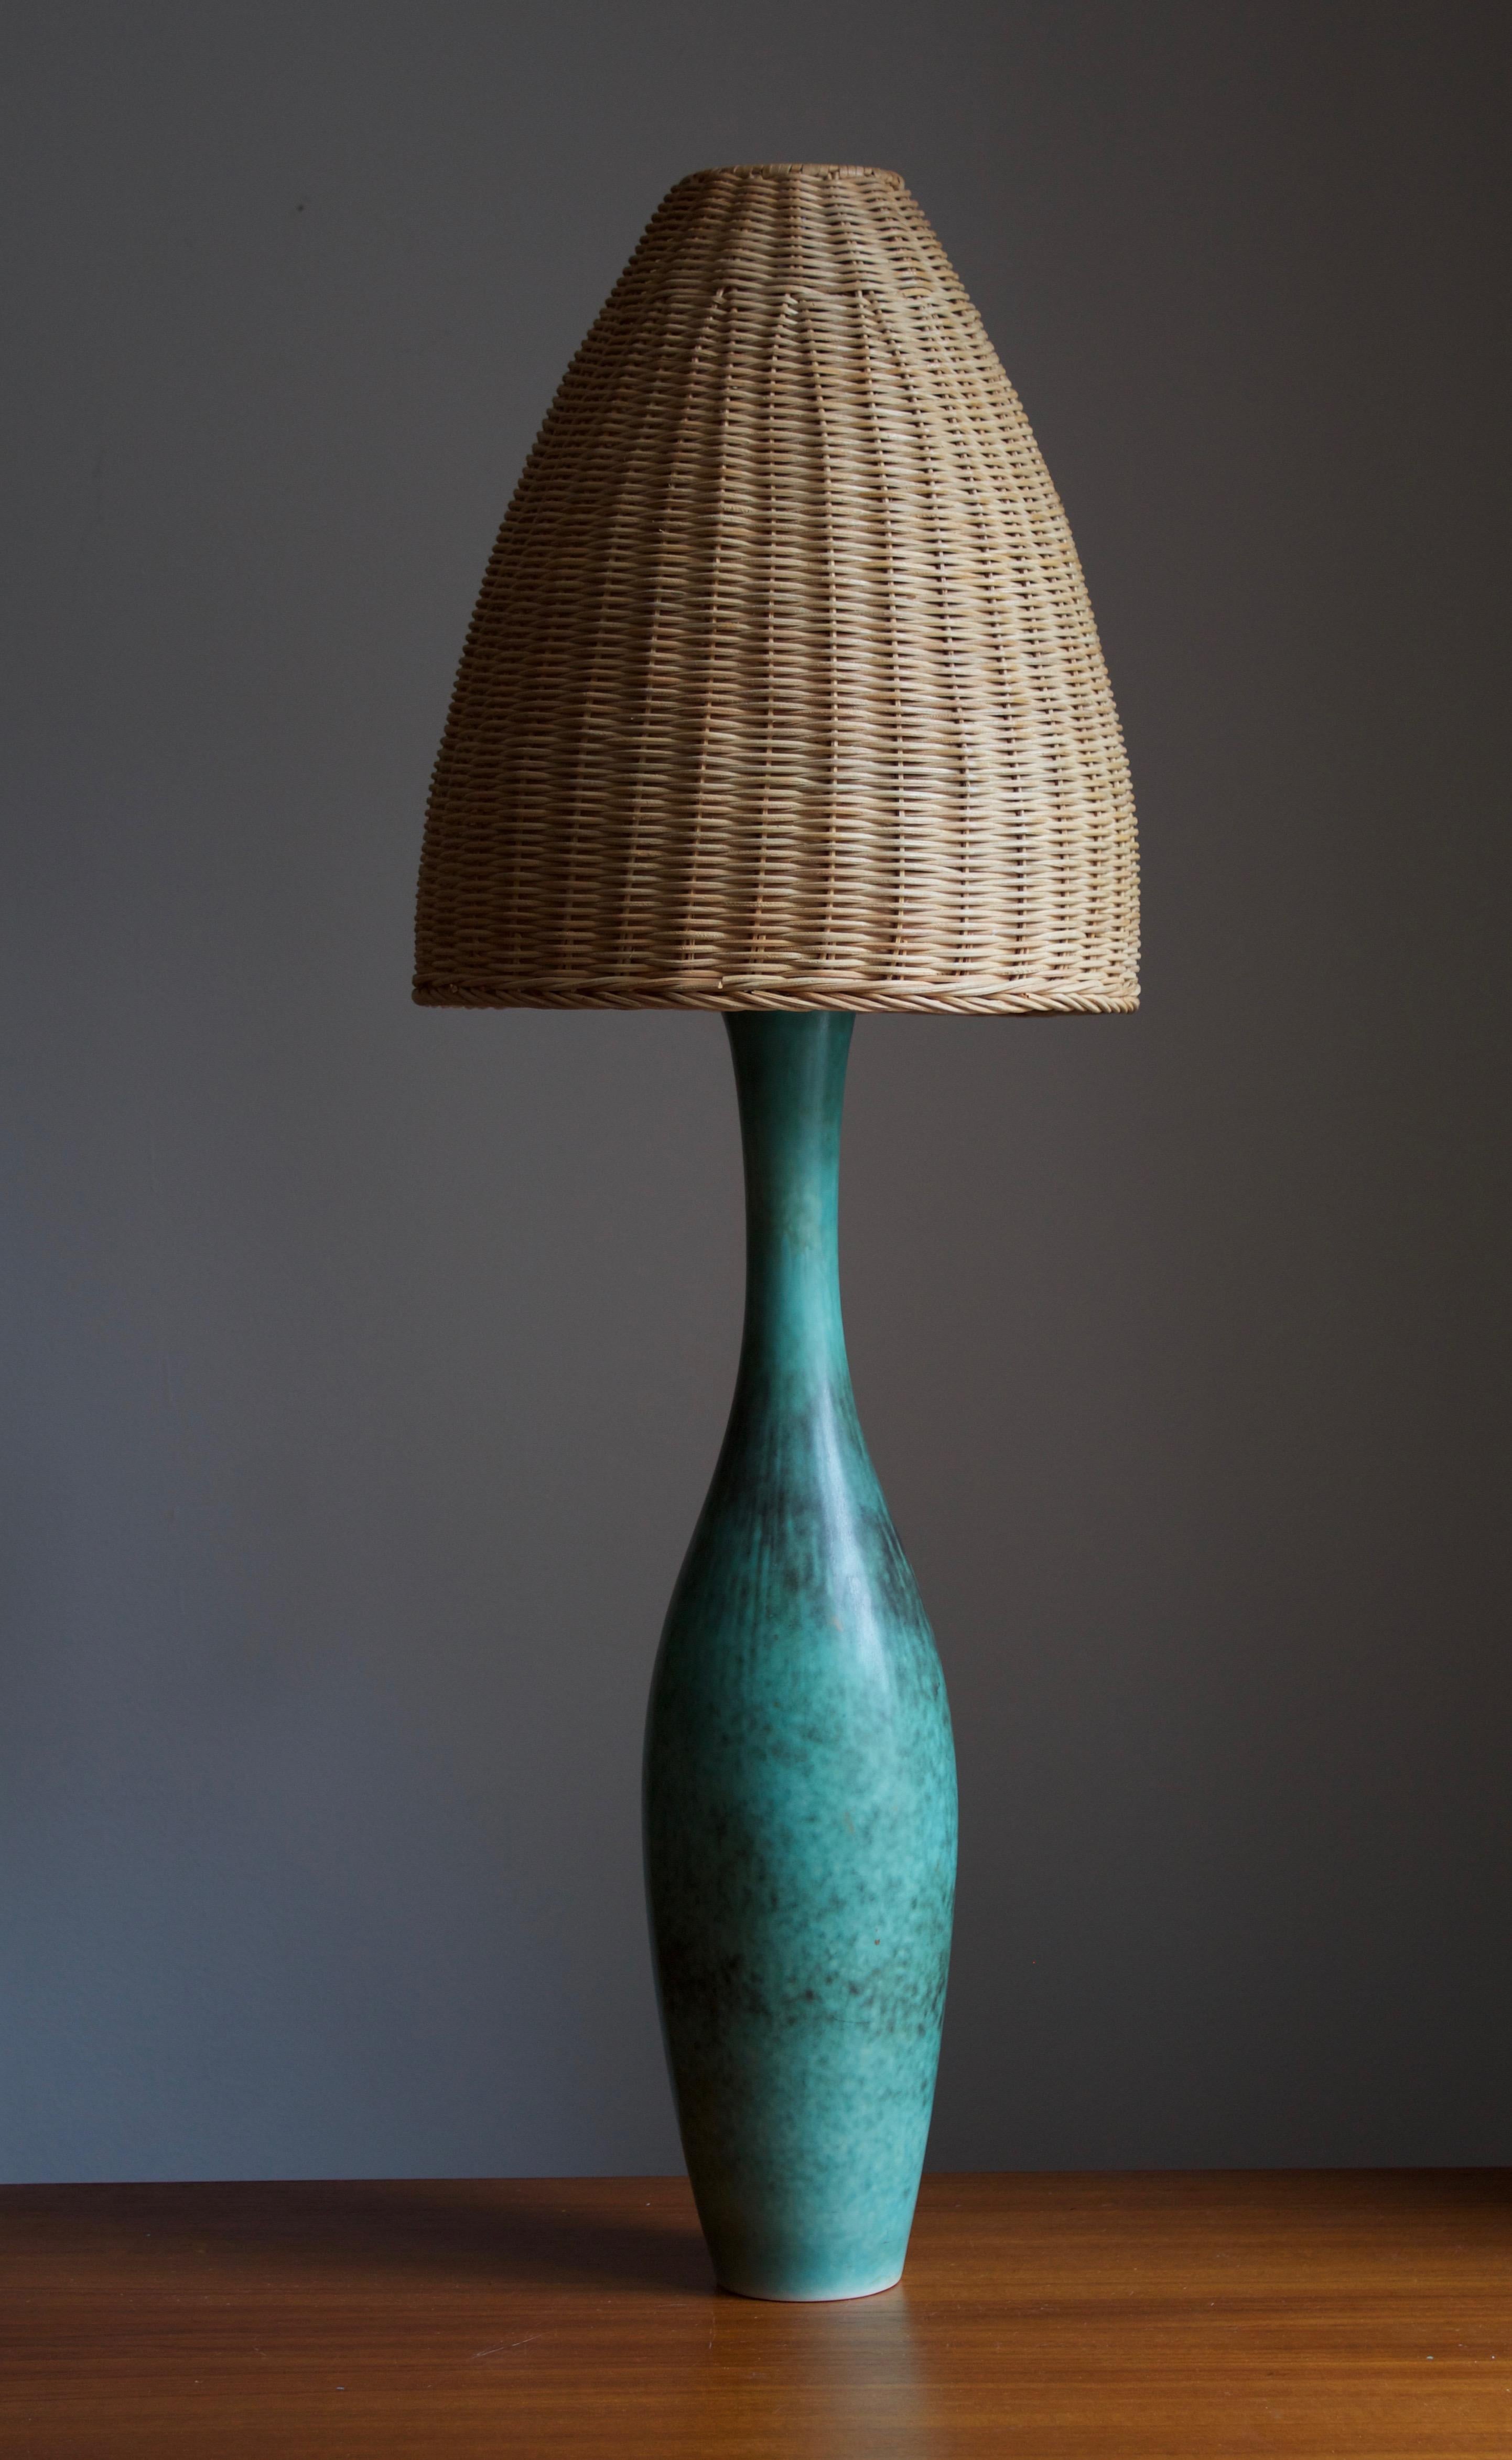 A large table lamp by Carl-Harry Stålhane for the iconic Swedish firm Rörstrand. 

Stated dimensions exclude lampshades. Height includes socket. Lampshade illustrated can be included in purchase upon request. 

Glaze features a blue-green